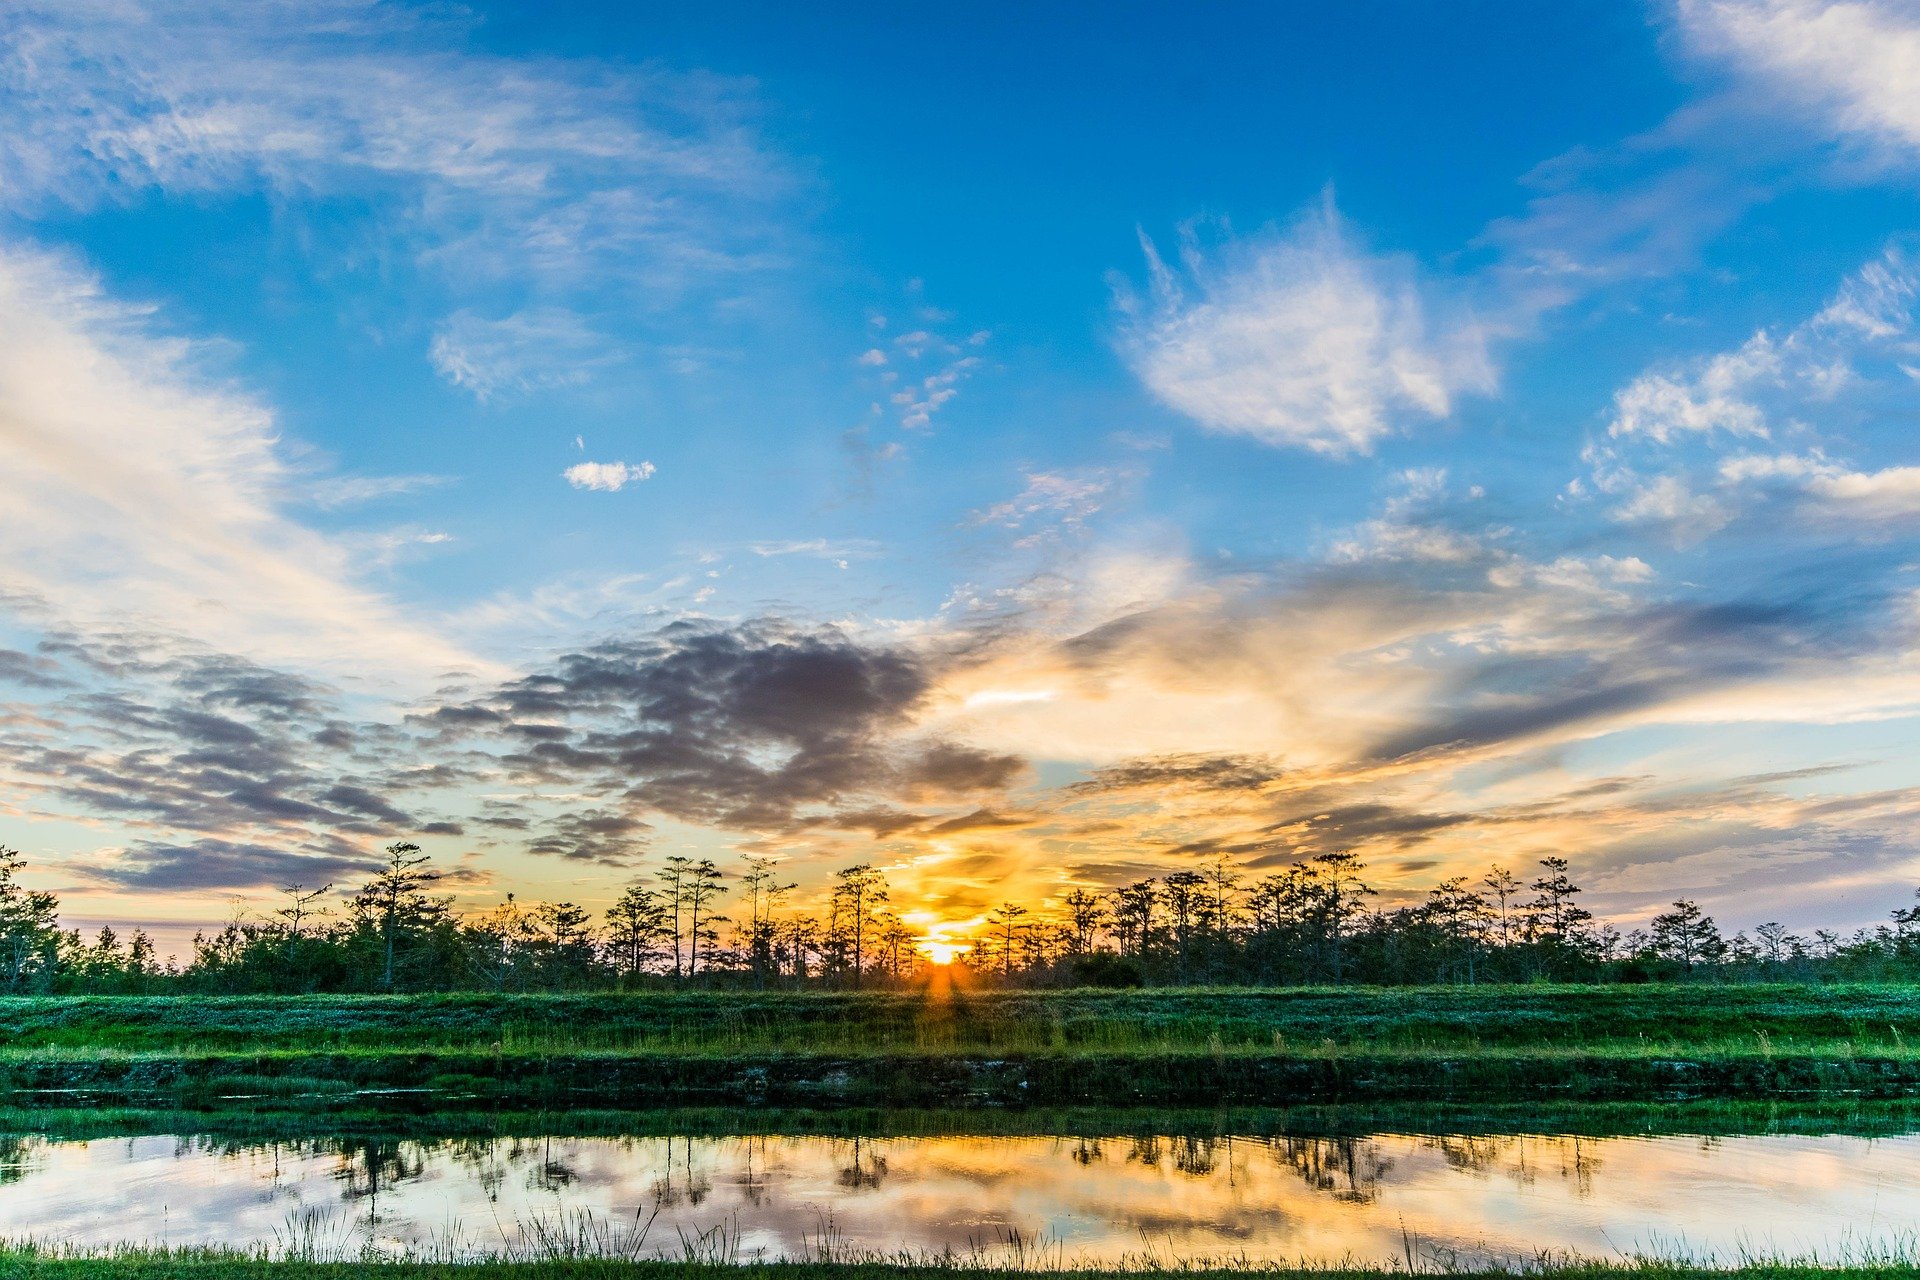 The sun setting over an Everglades landscape, with low trees and water in the foreground.